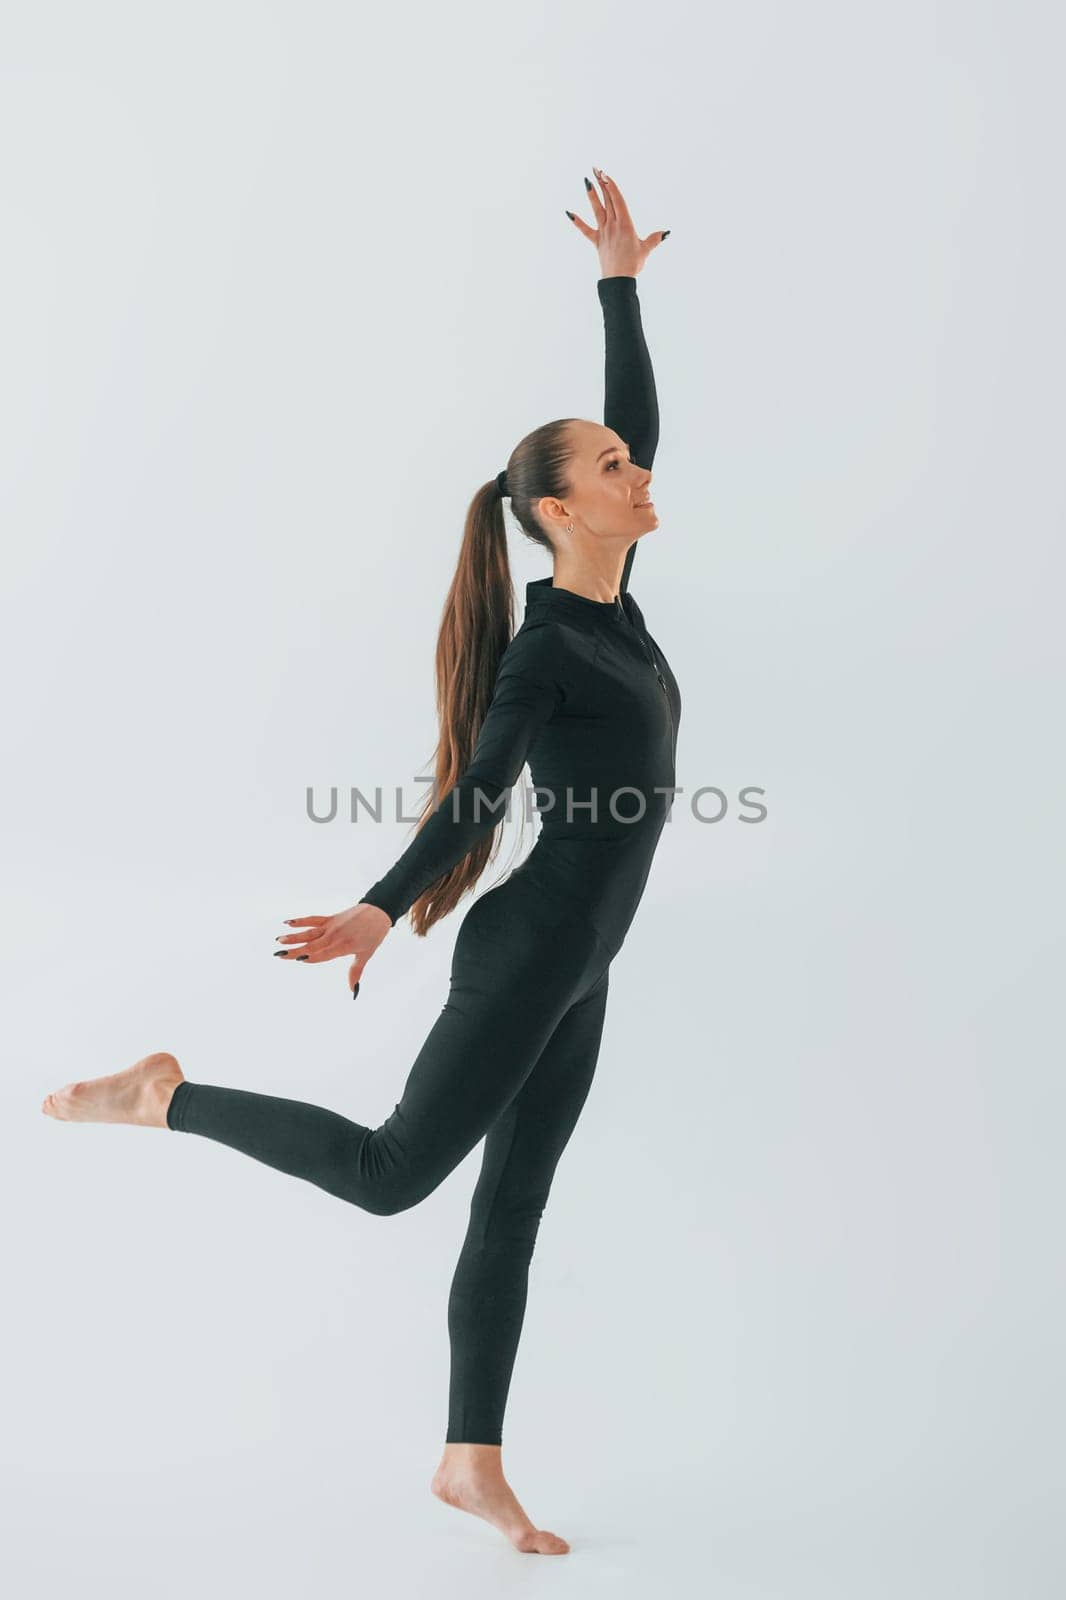 In black sportive clothes. Young woman doing gymnastics indoors.